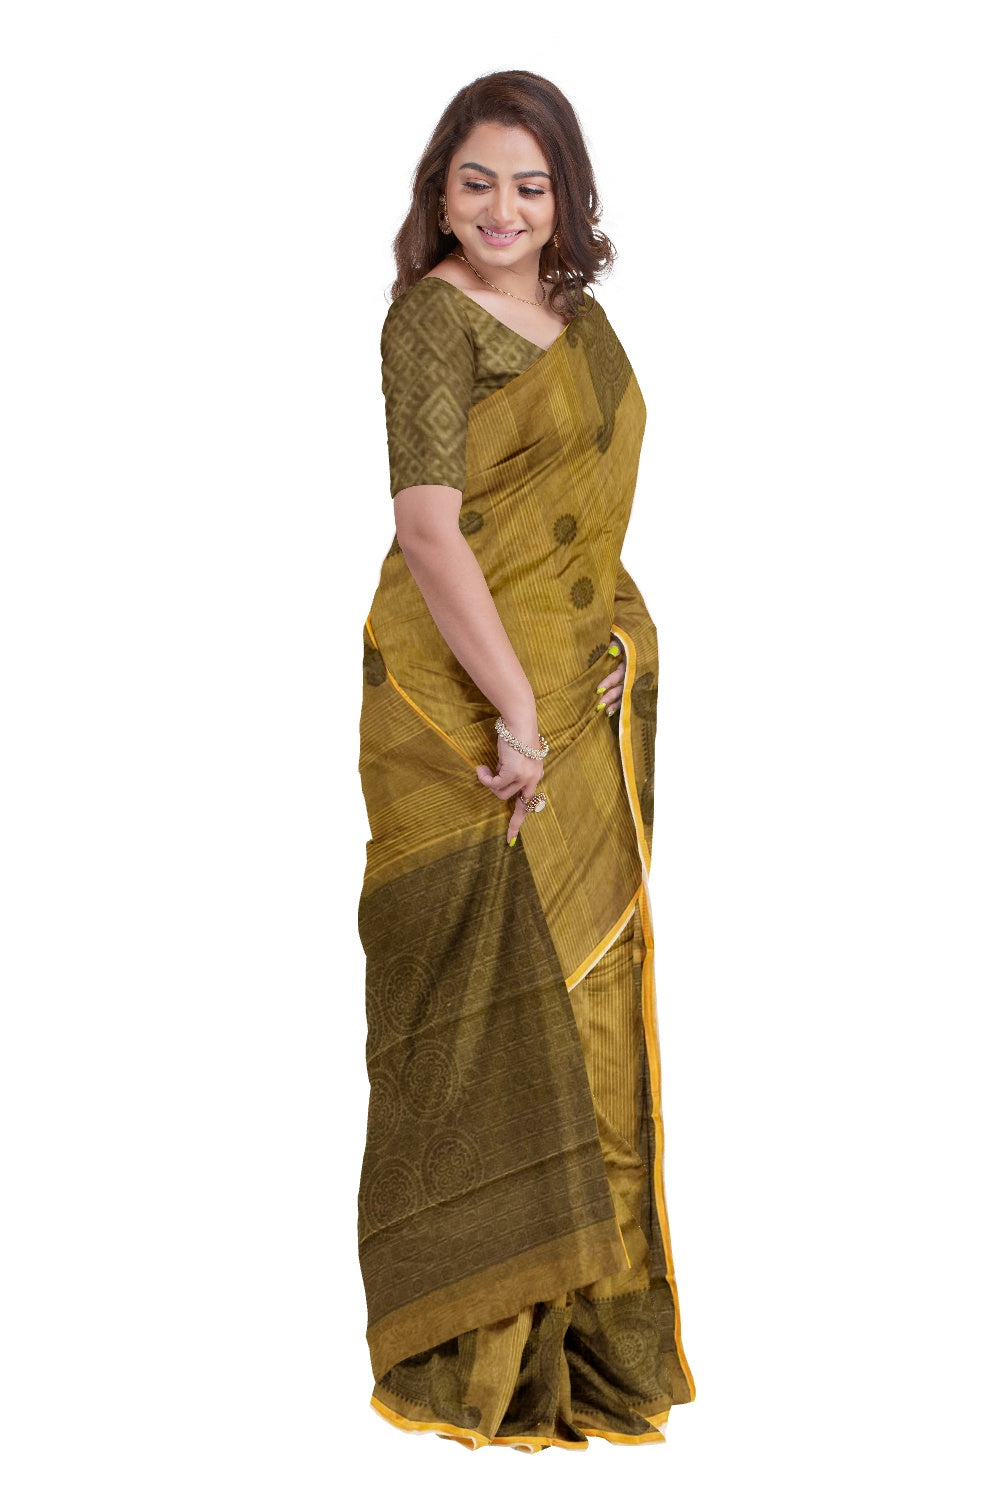 Southloom Sico Gadwal Semi Silk Saree in Brown with Floral Motifs (Blouse Piece with Work)